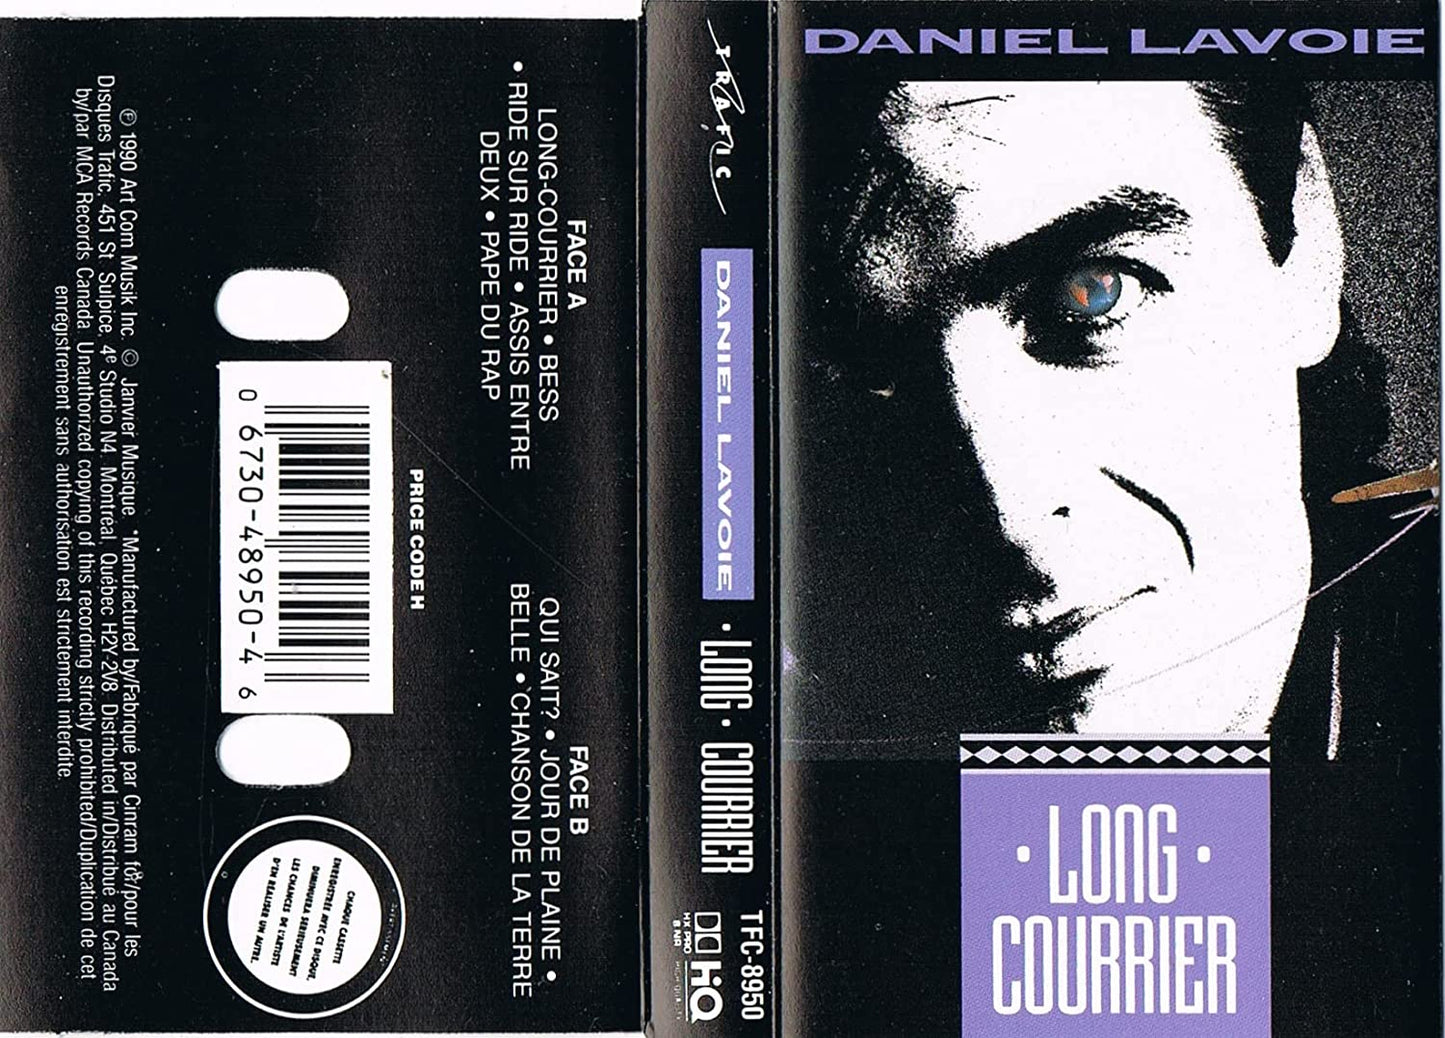 Long Courrier [Audio CD / USED Like New] Daniel Lavoie